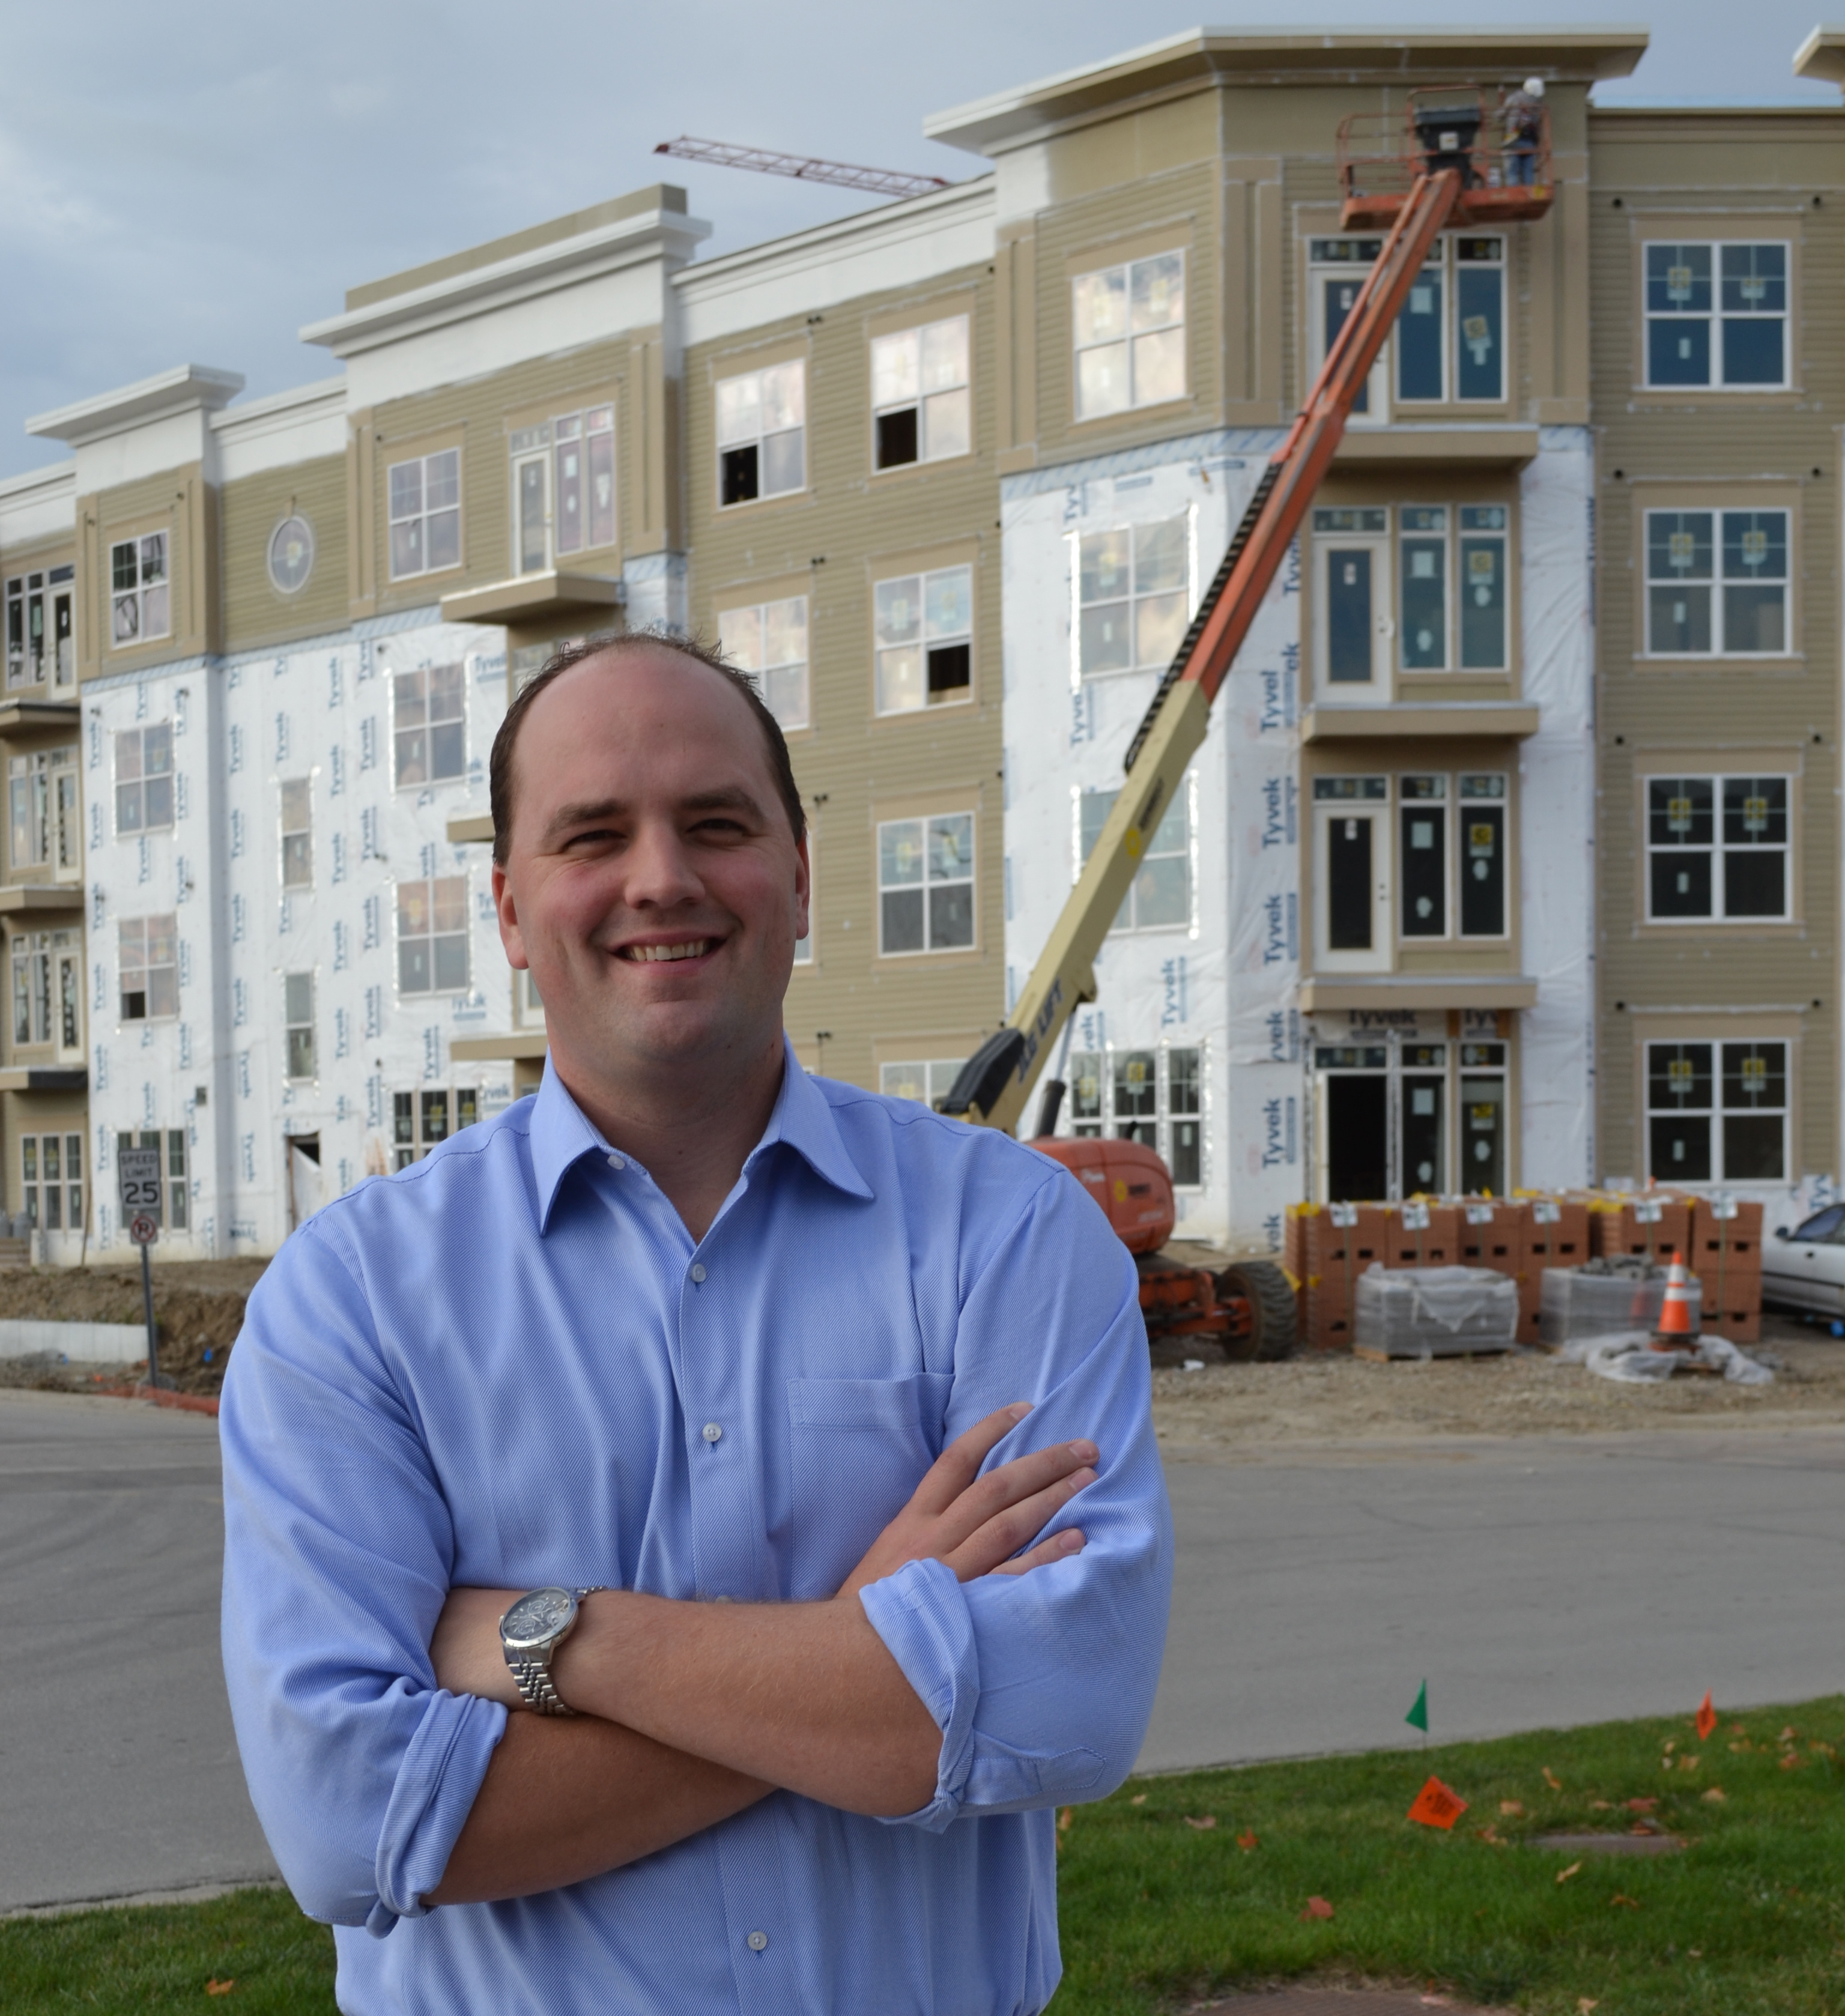 Fishers Town Manager and Mayor-elect Scott Fadness stands in front of the construction projects he has spearheaded in downtown Fishers. (Photo by John Cinnamon)